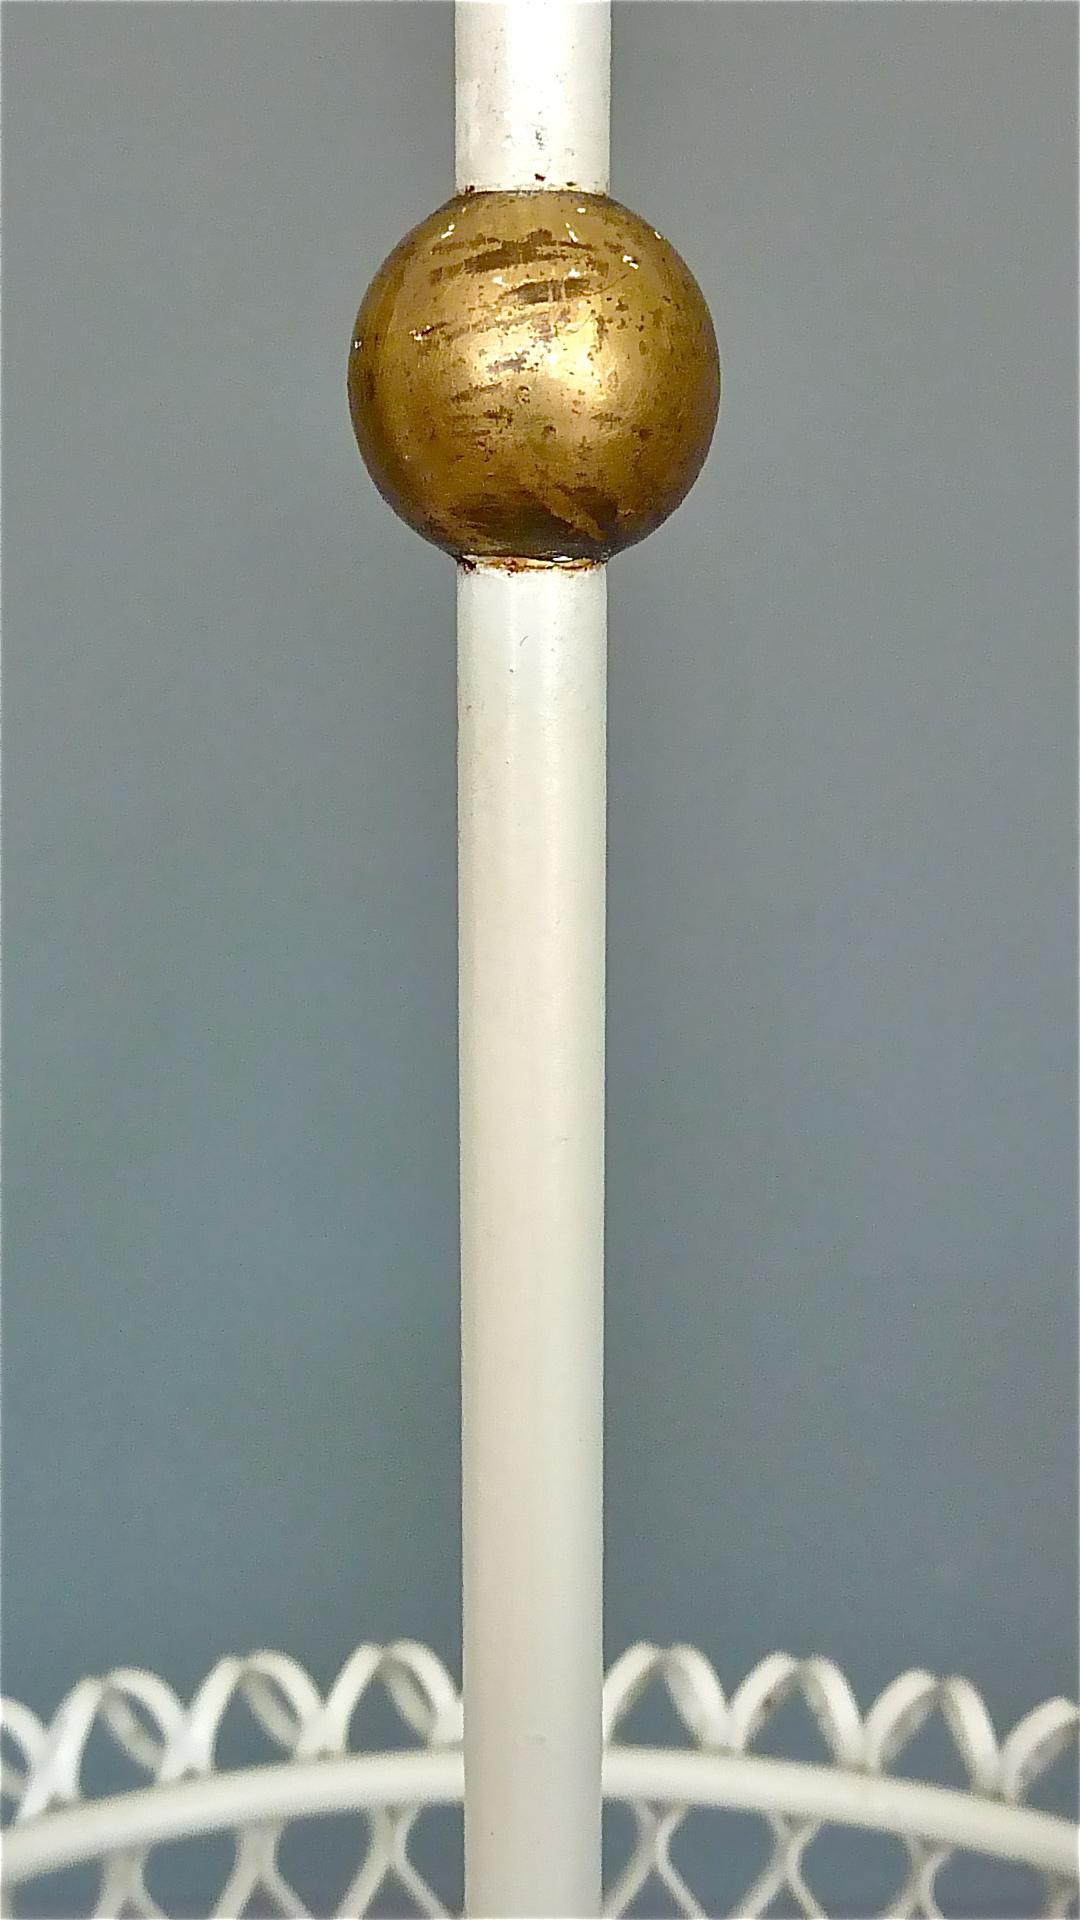 Chic French Umbrella Stand Matégot Biny Style White Enameled Metal Brass, 1950s For Sale 1